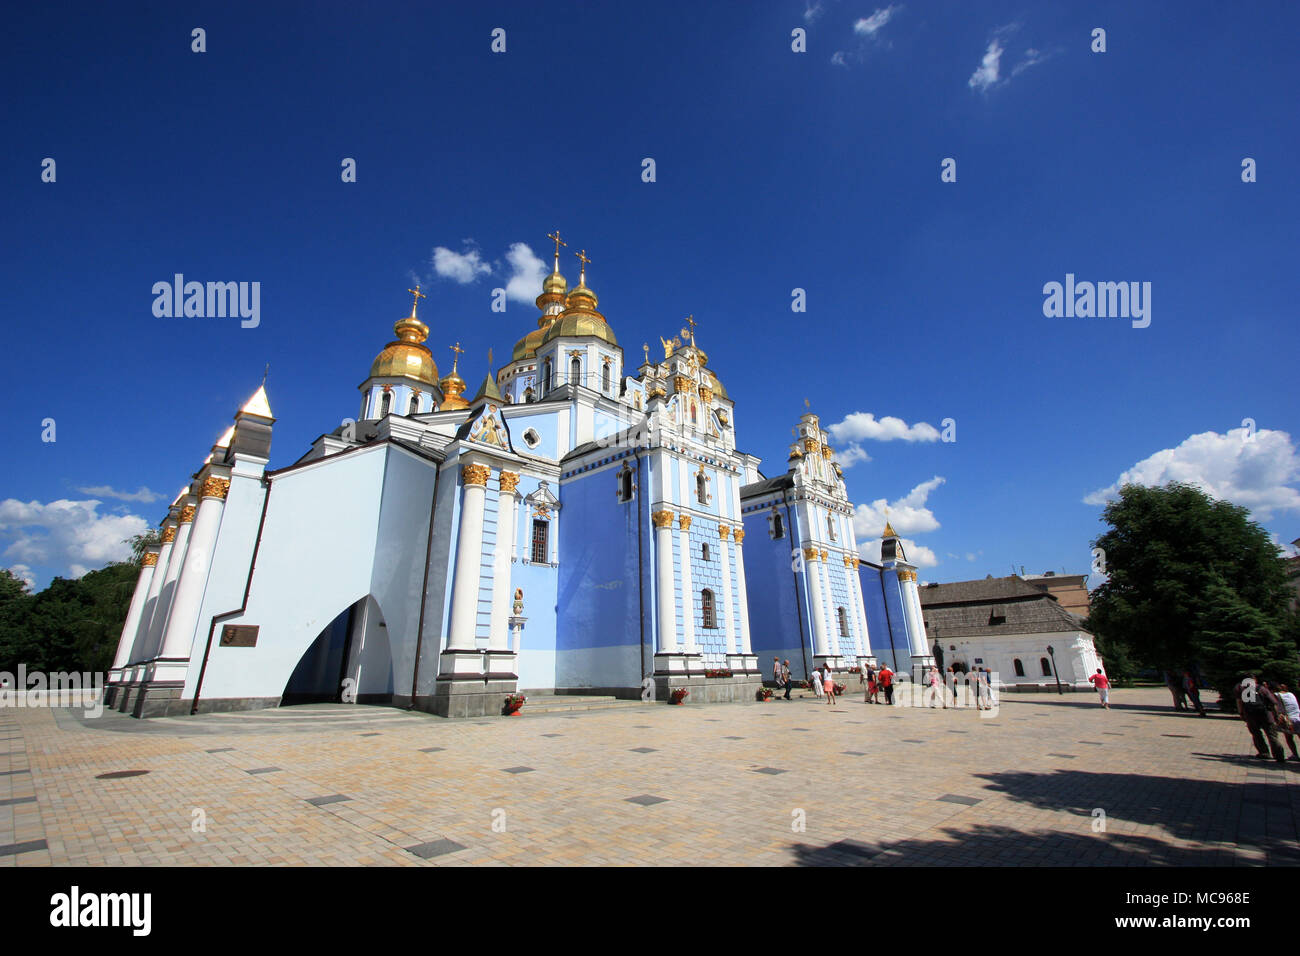 The St. Michael's Golden-Domed Cathedral on the grounds of the St. Michael's Golden-Domed Monastery in Kyiv, Ukraine Stock Photo